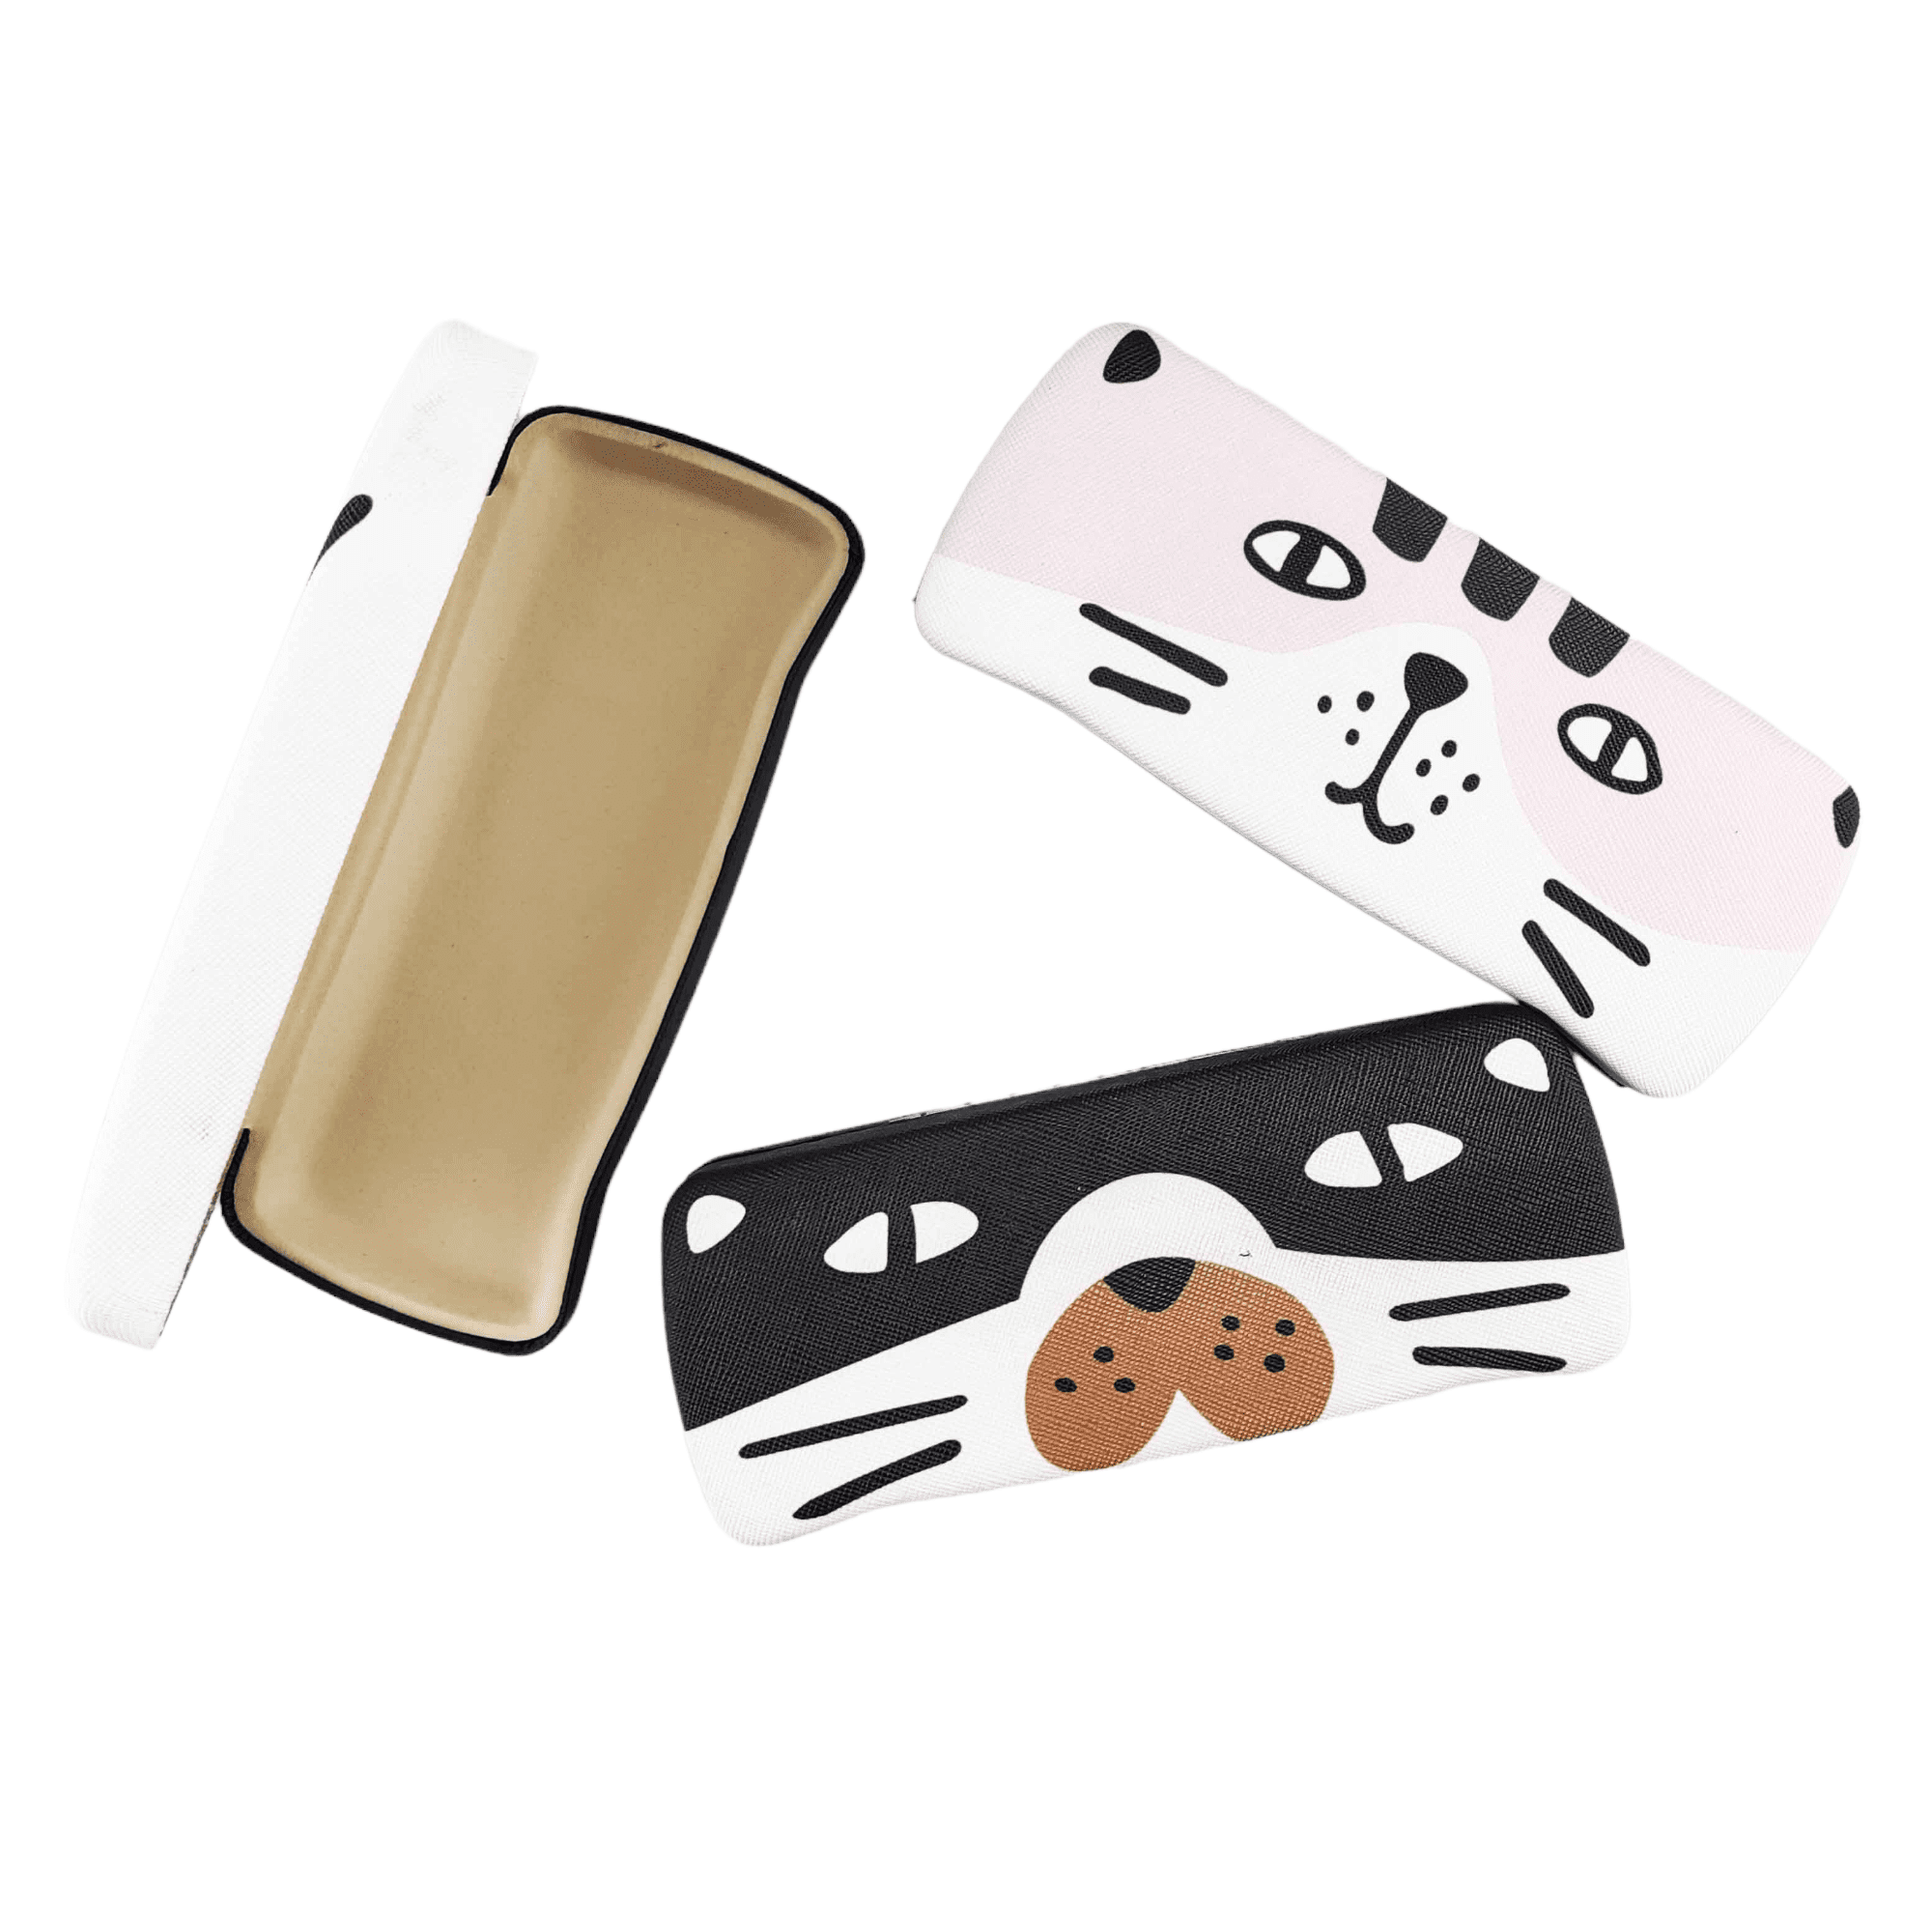 Glasses Case Organizer Zhejiang Wenzou Wholesale, Glasses Case Organizer Zhejiang Wenzou Wholesale, glasses box or case, cat cartoon print, black, white, pink, khaki, eyeglass accessories, care vision, glasses protection, soft lining, opened glasses case